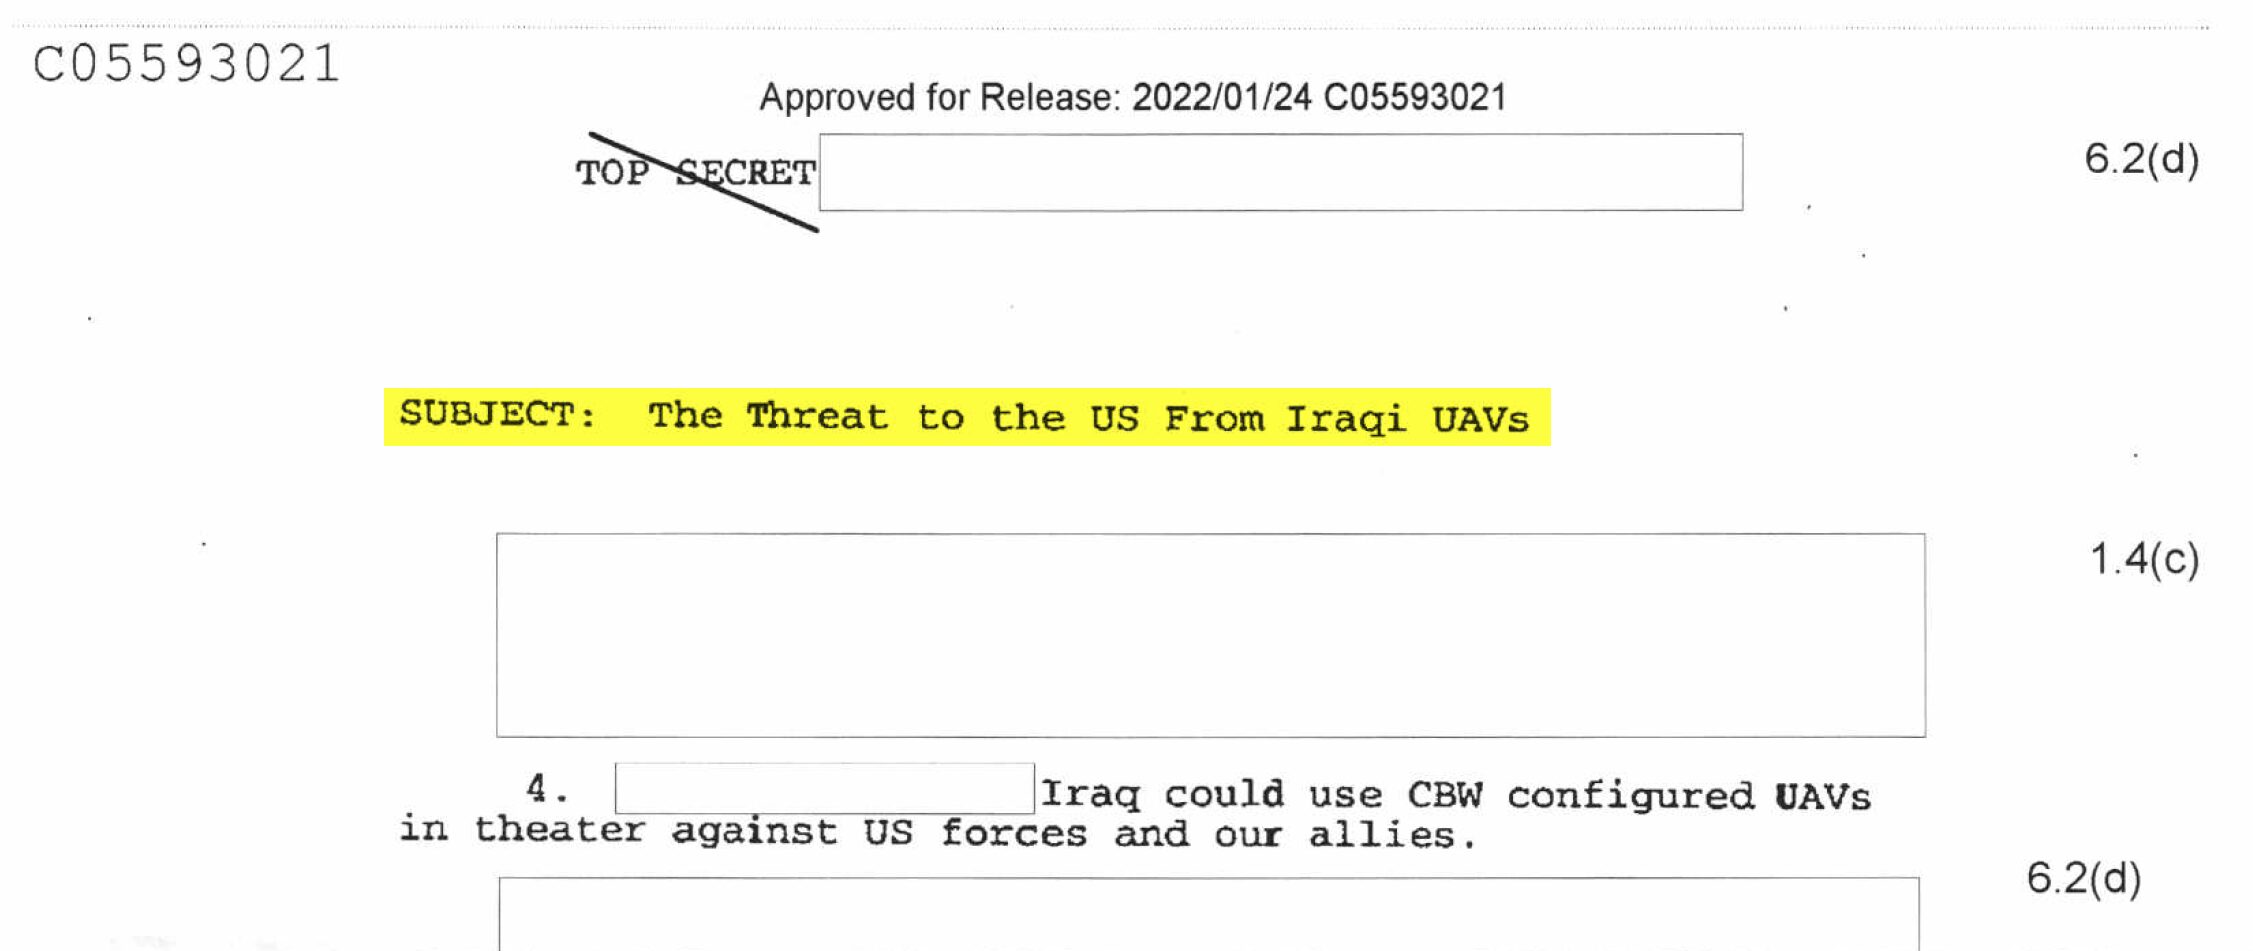 The CIA’s Assessment of the Threat From Iraqi UAVs – March 3, 2003